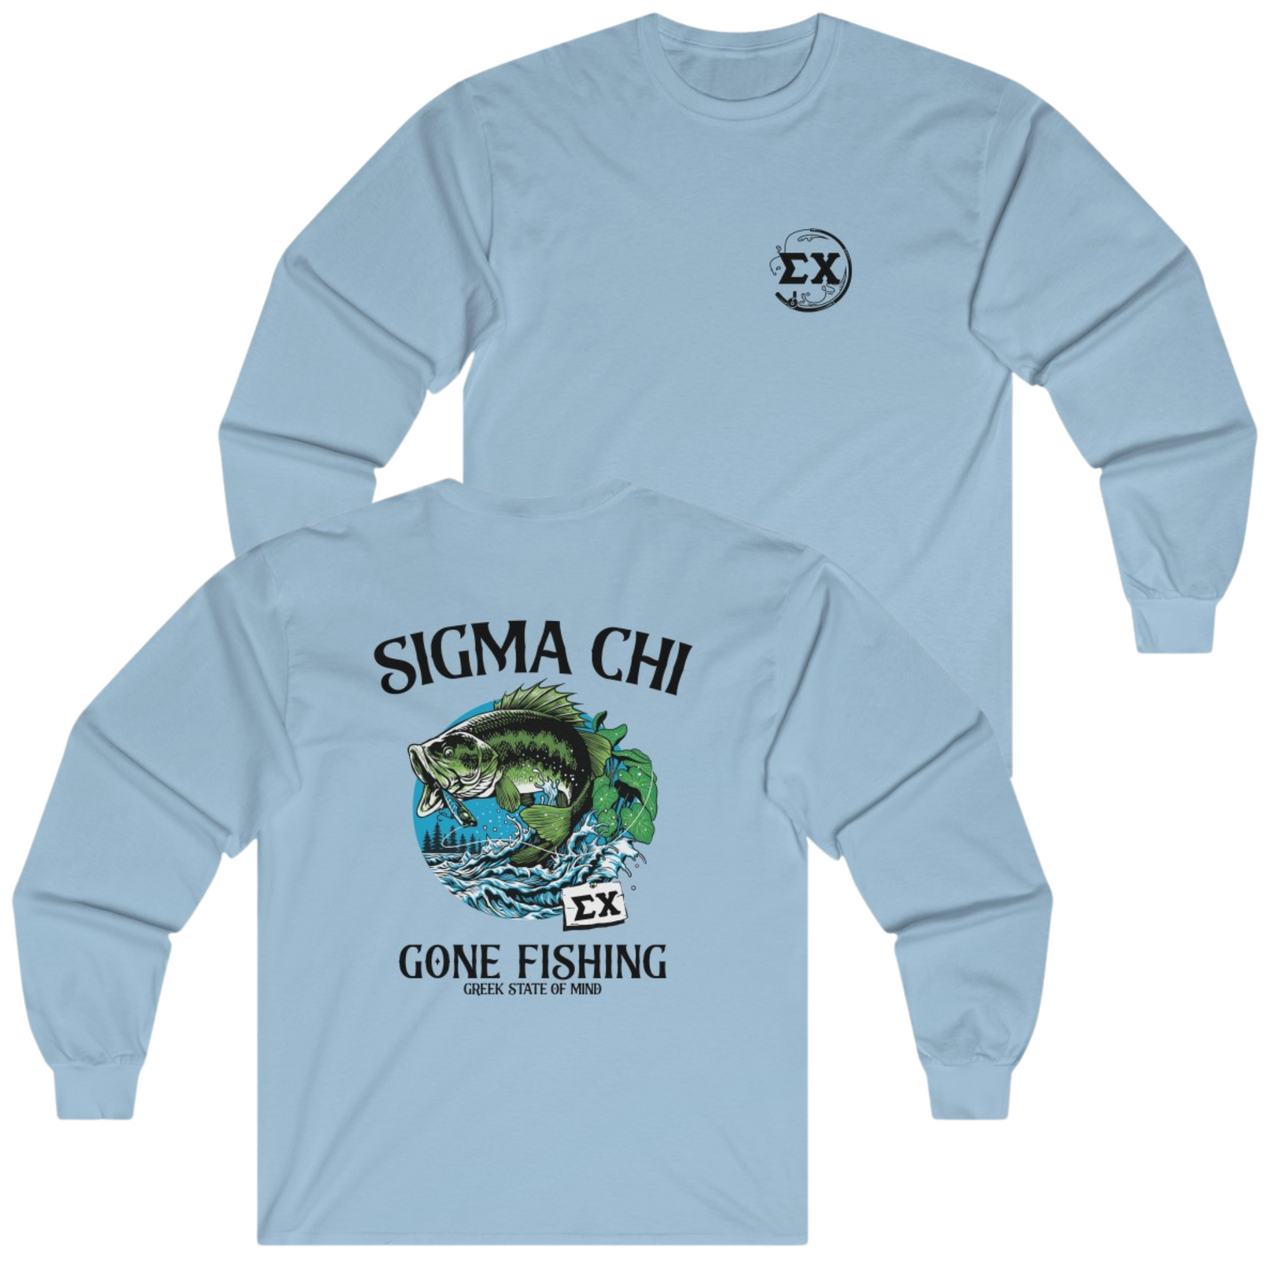 Light Blue Sigma Chi Graphic Long Sleeve T-Shirt | Gone Fishing | Sigma Chi Fraternity Apparel